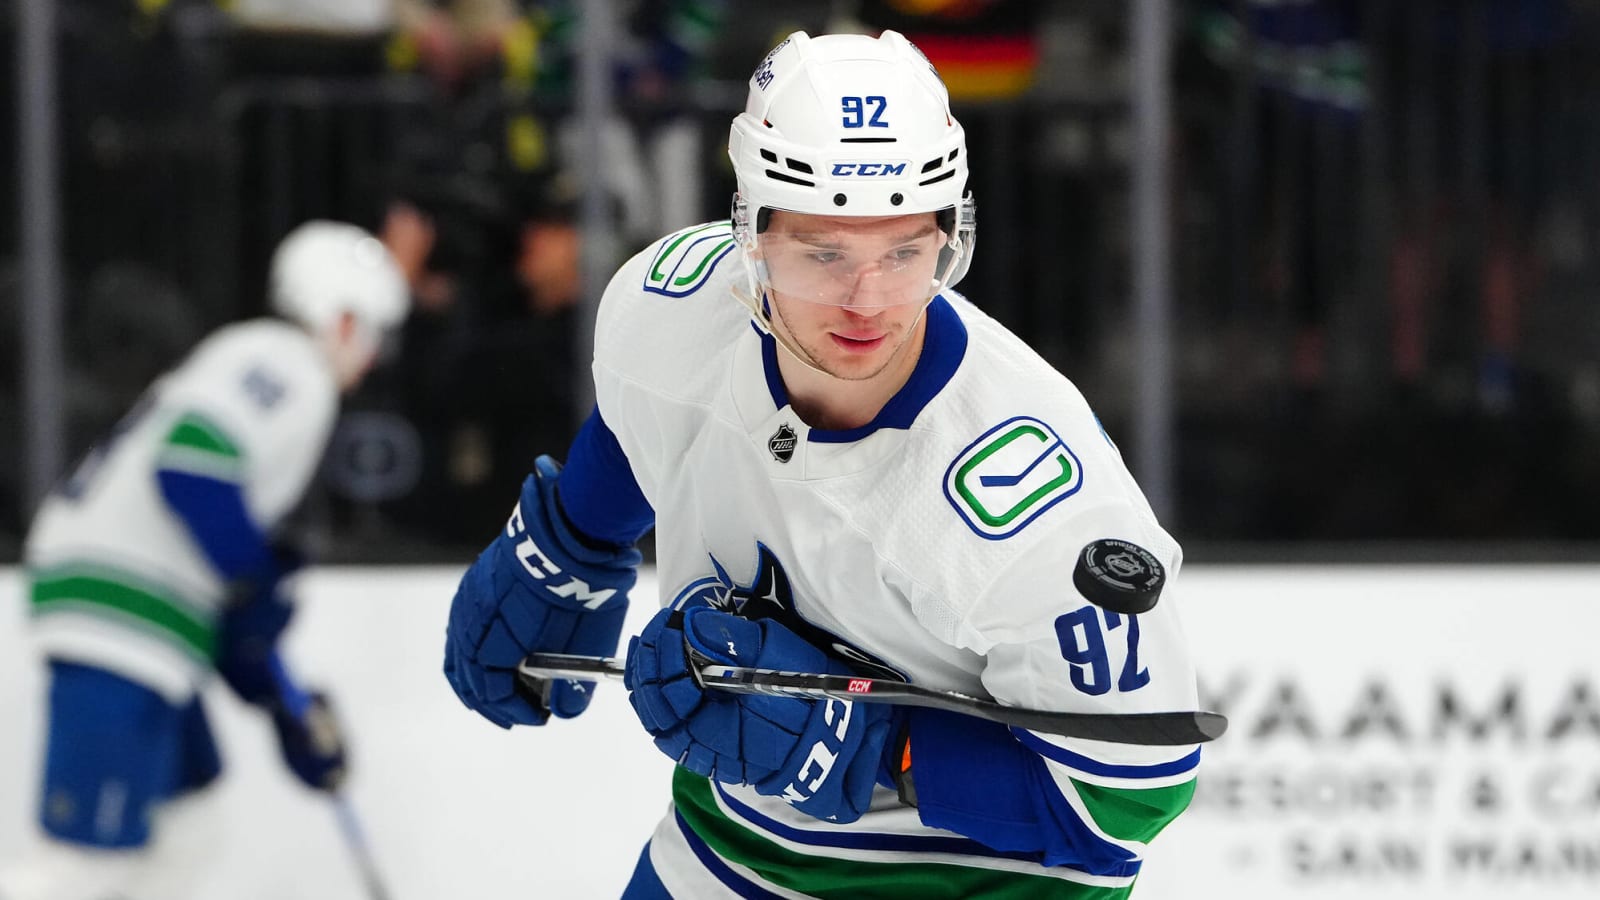 Canucks’ Podkolzin and Zadorov: Finding Their Roles in Vancouver